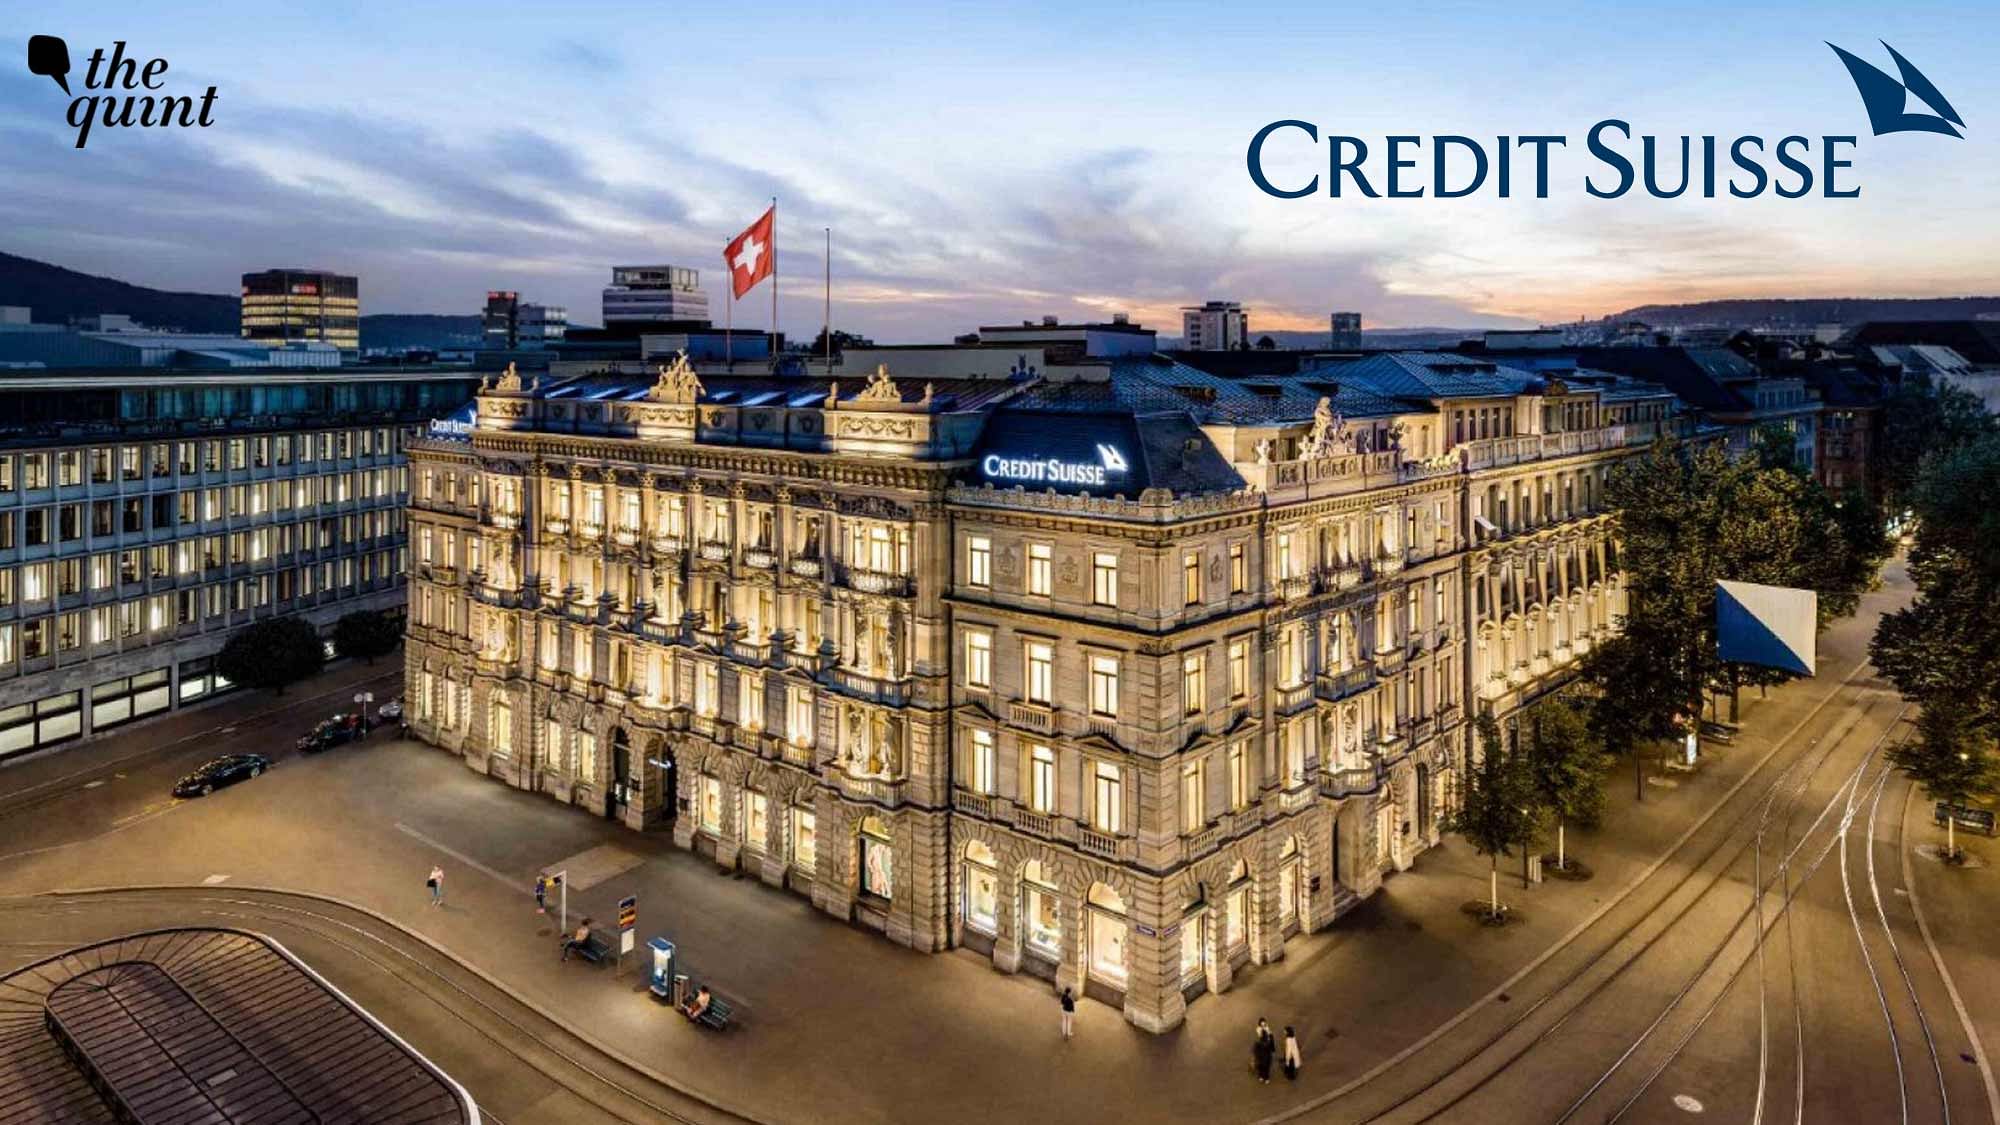 Explained Why Is Swiss Bank Credit Suisse in the News? And What Will